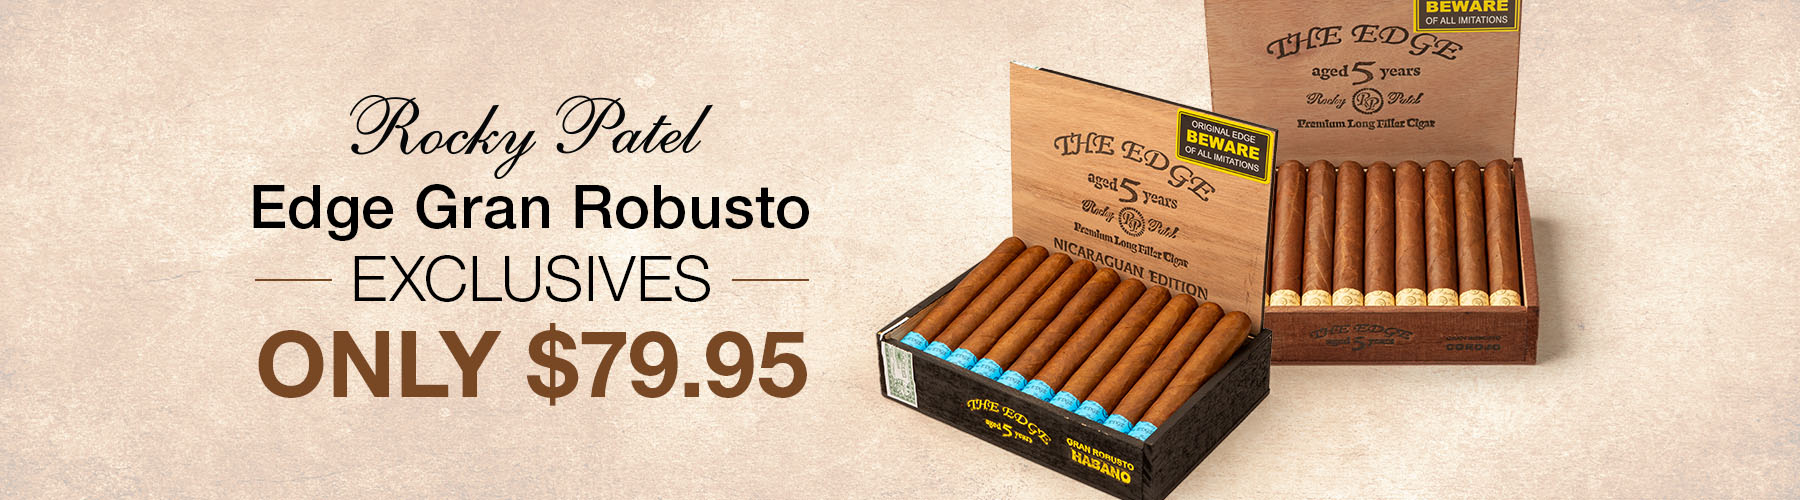 Rocky Patel Edge Gran Robusto Exclusives Only $79.95!